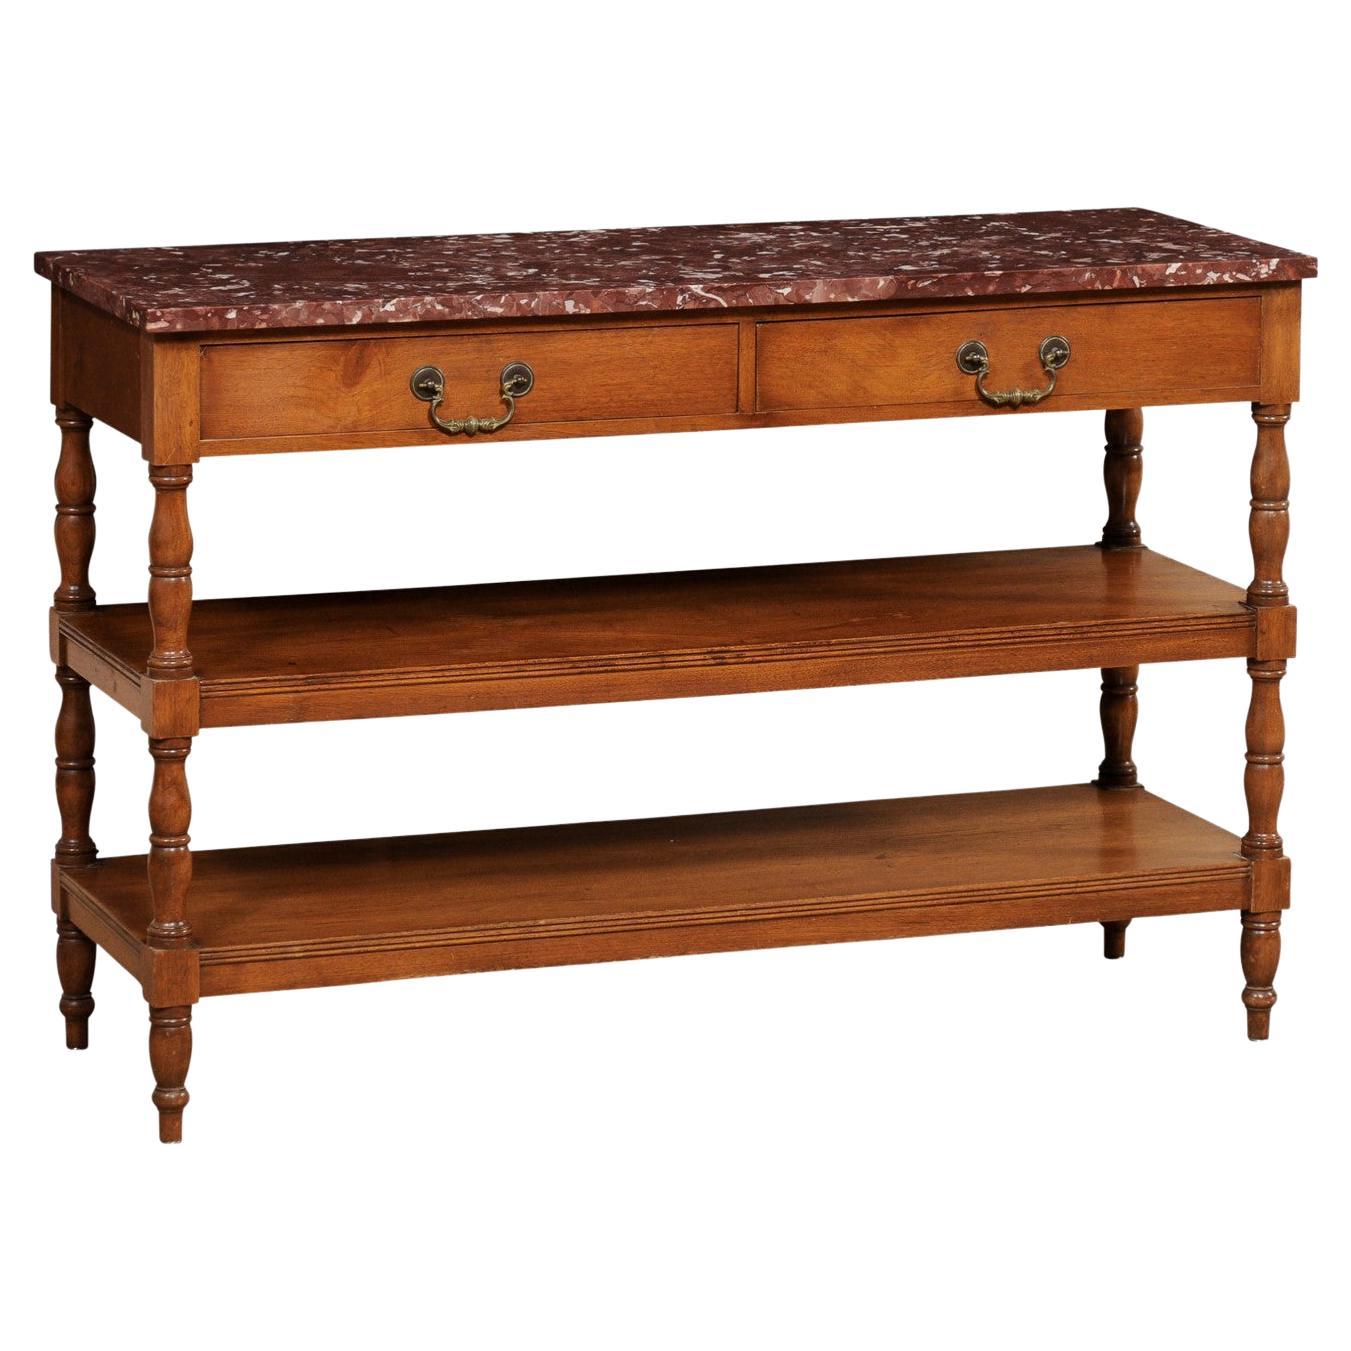 French Tiered Console Table with Marble Top & 2-Drawers from the Late 19th C